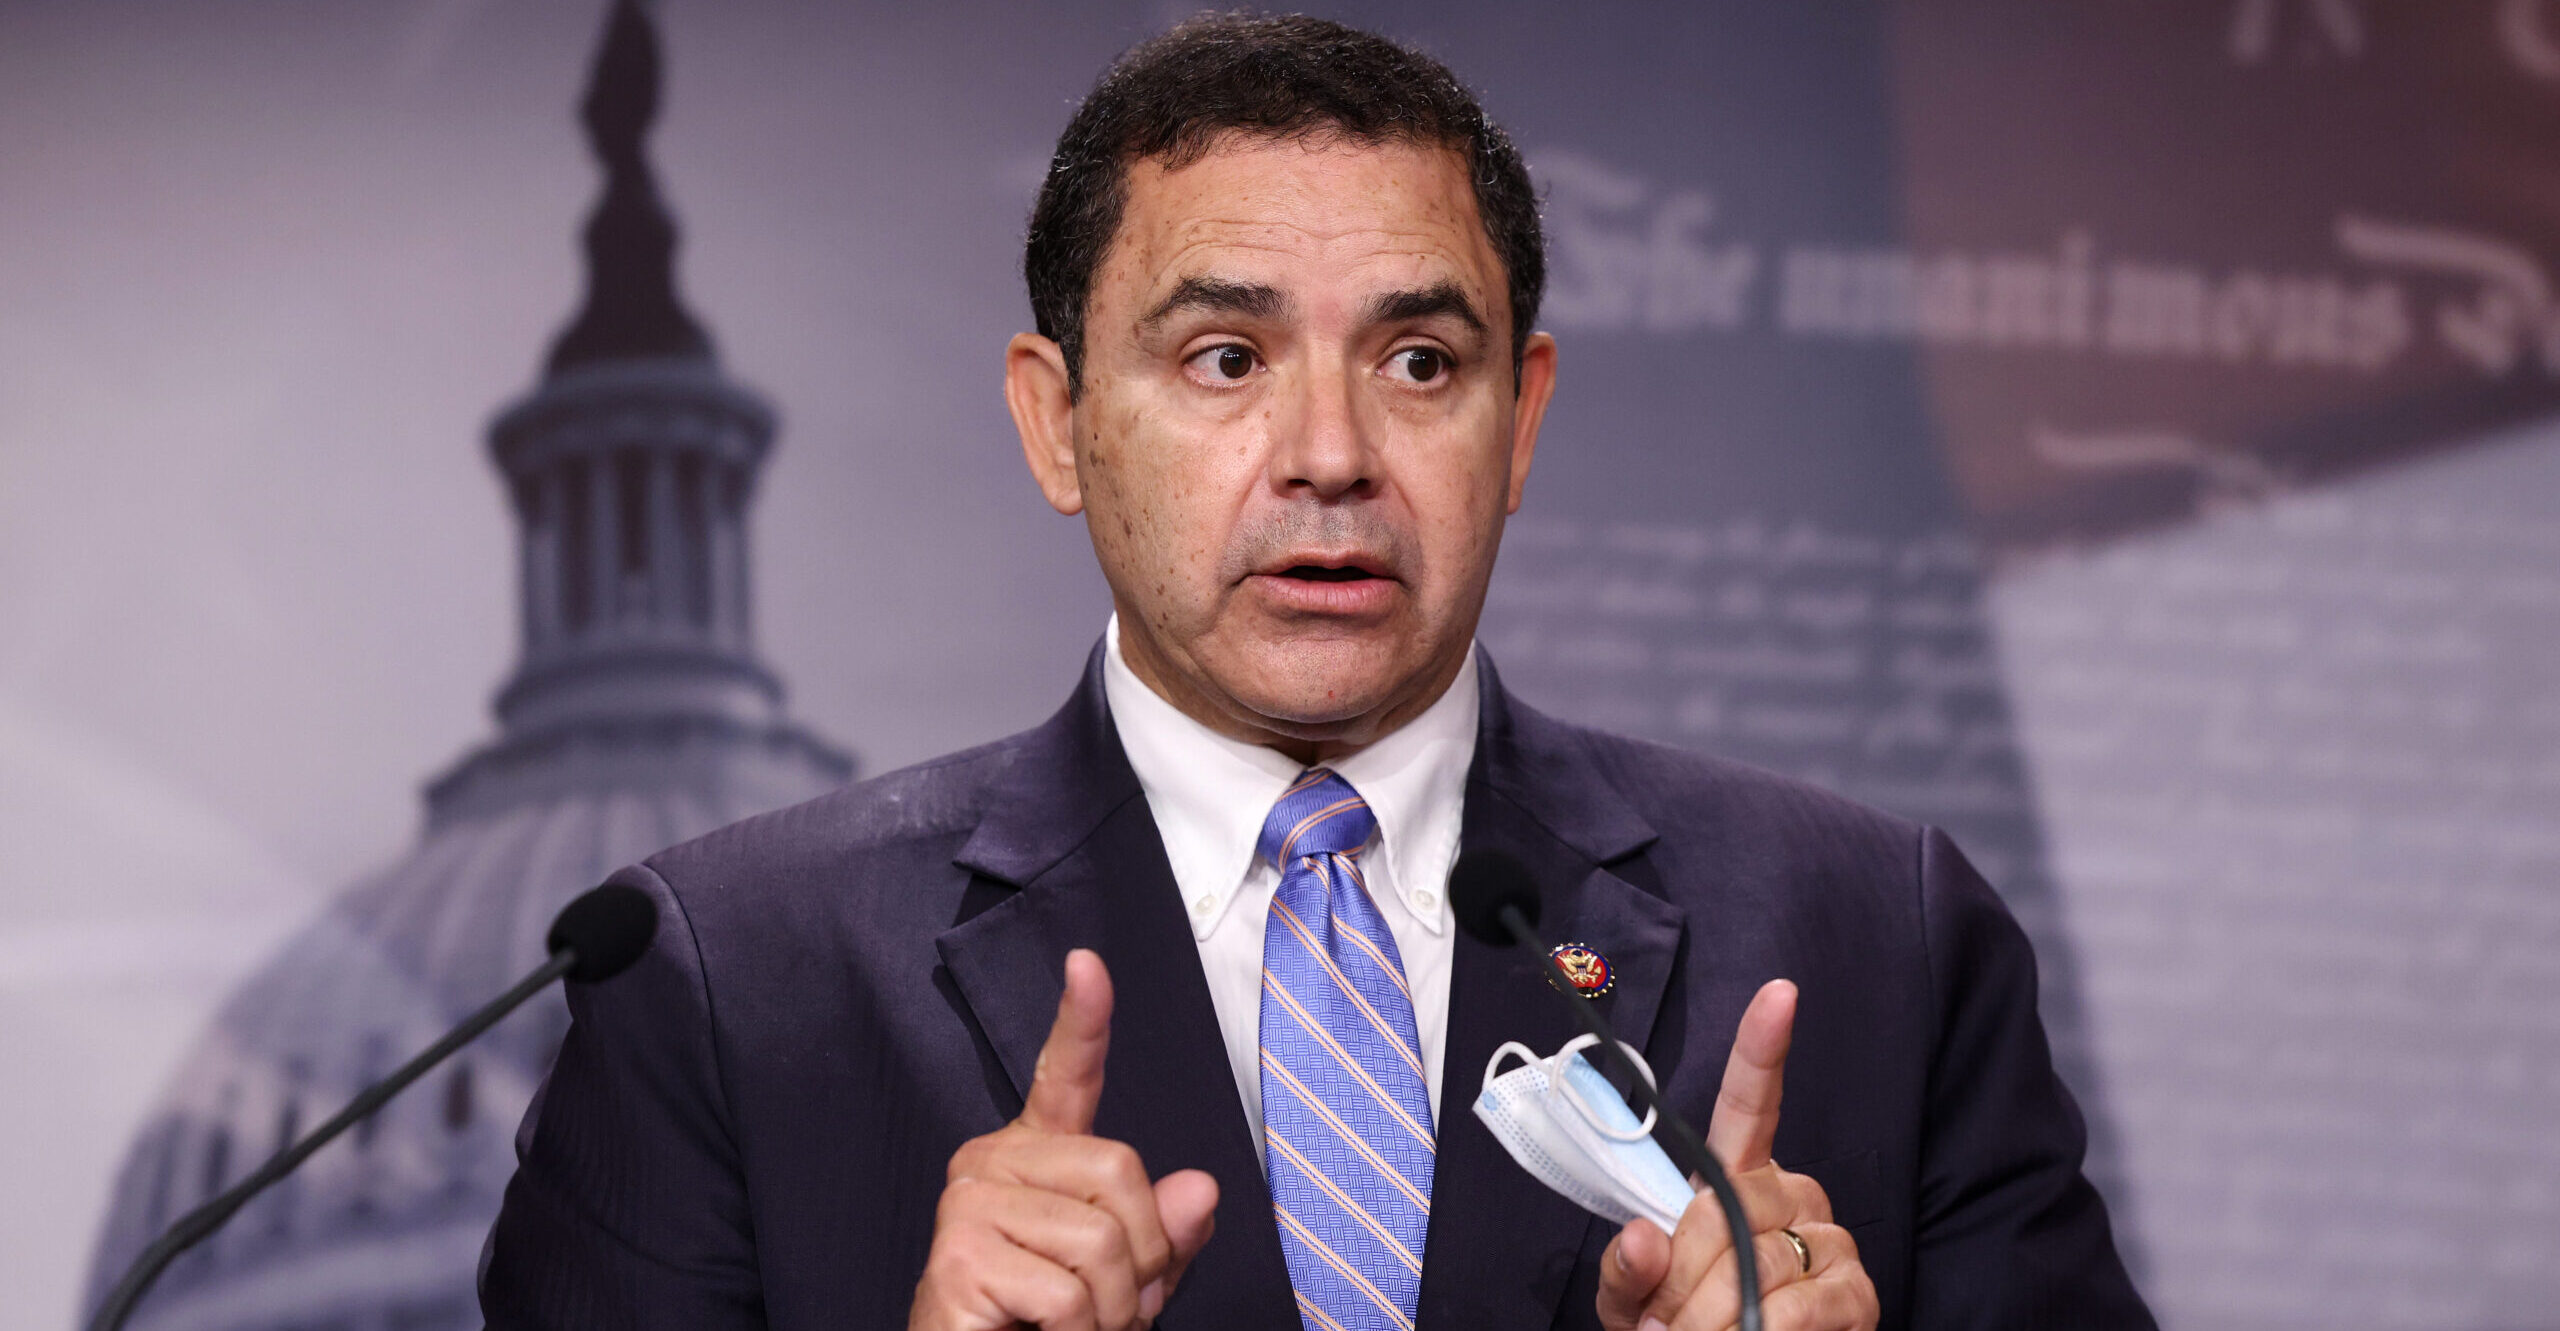 FBI Searches Home of Congressman Henry Cuellar, Who Says He ‘Will Fully Cooperate In Any Investigation’